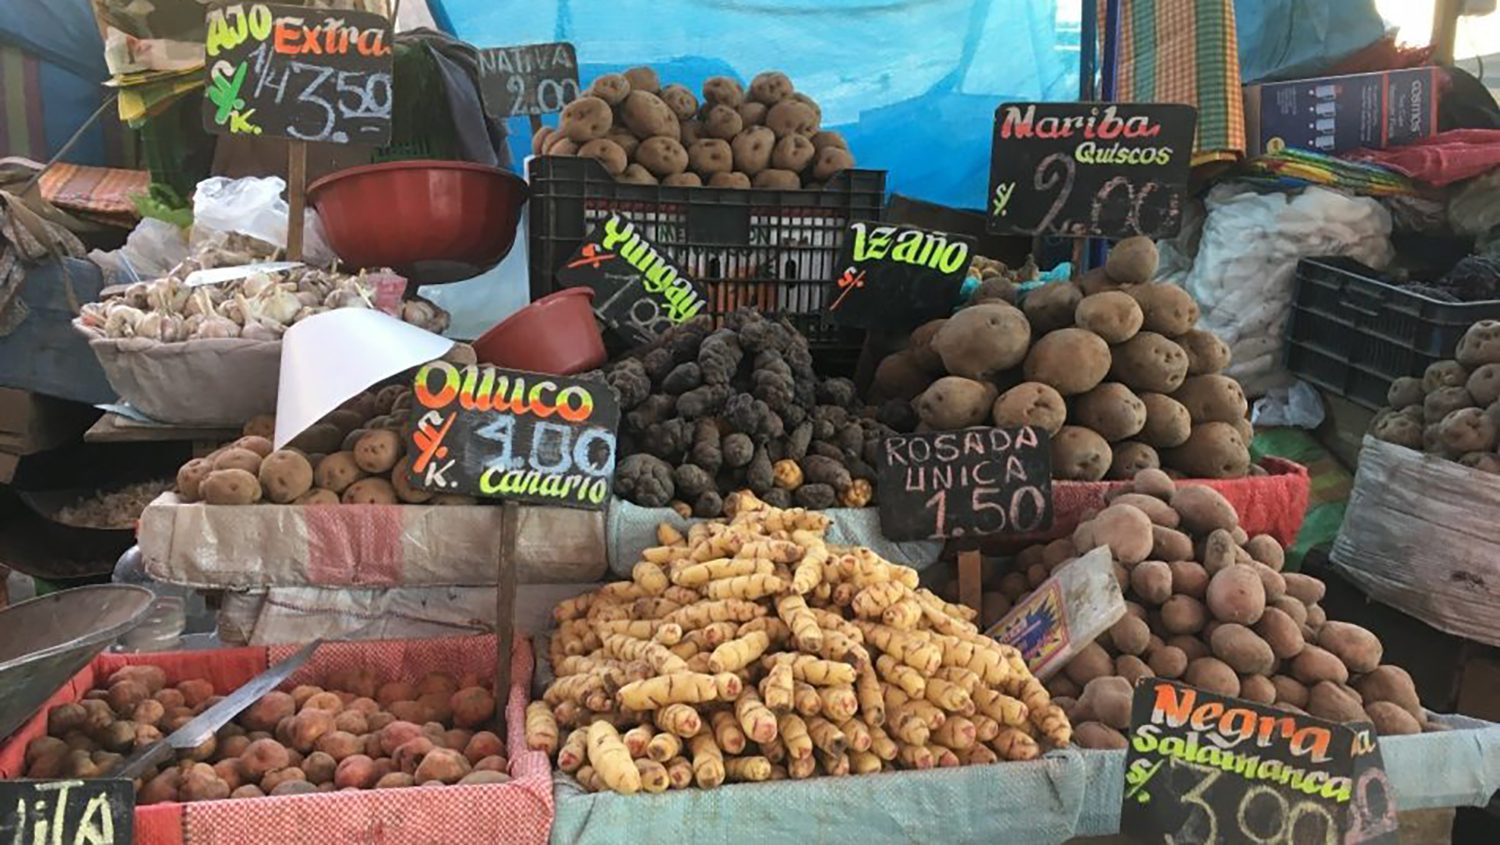 A colorful array of tubers arranged at an open air market